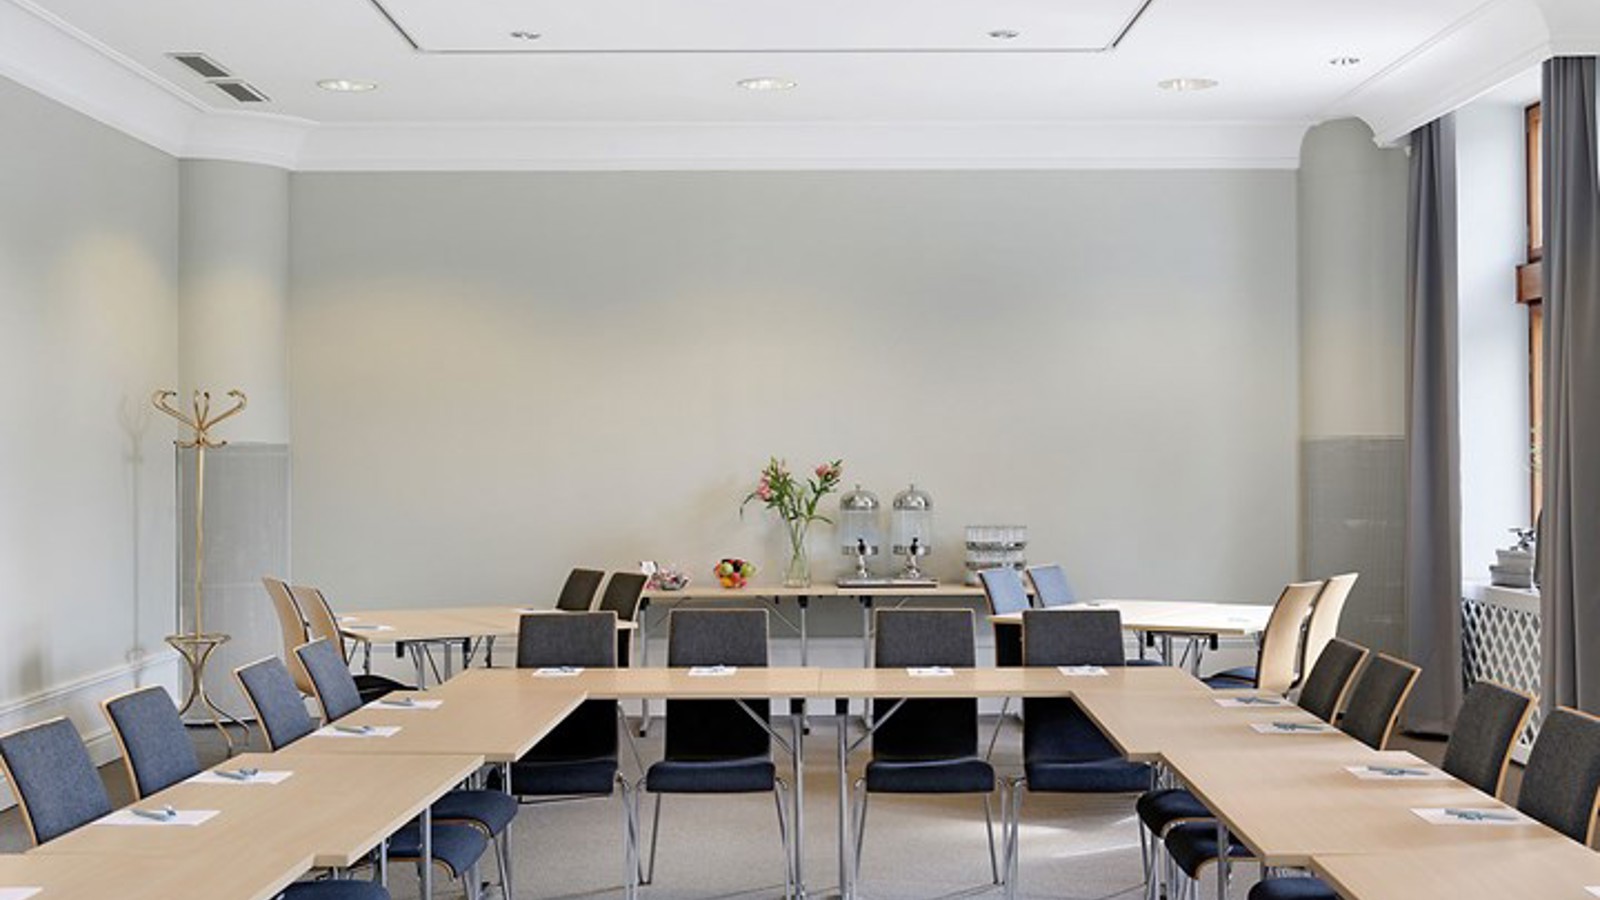 Conference room with u-shaped seating, gray walls and large windows